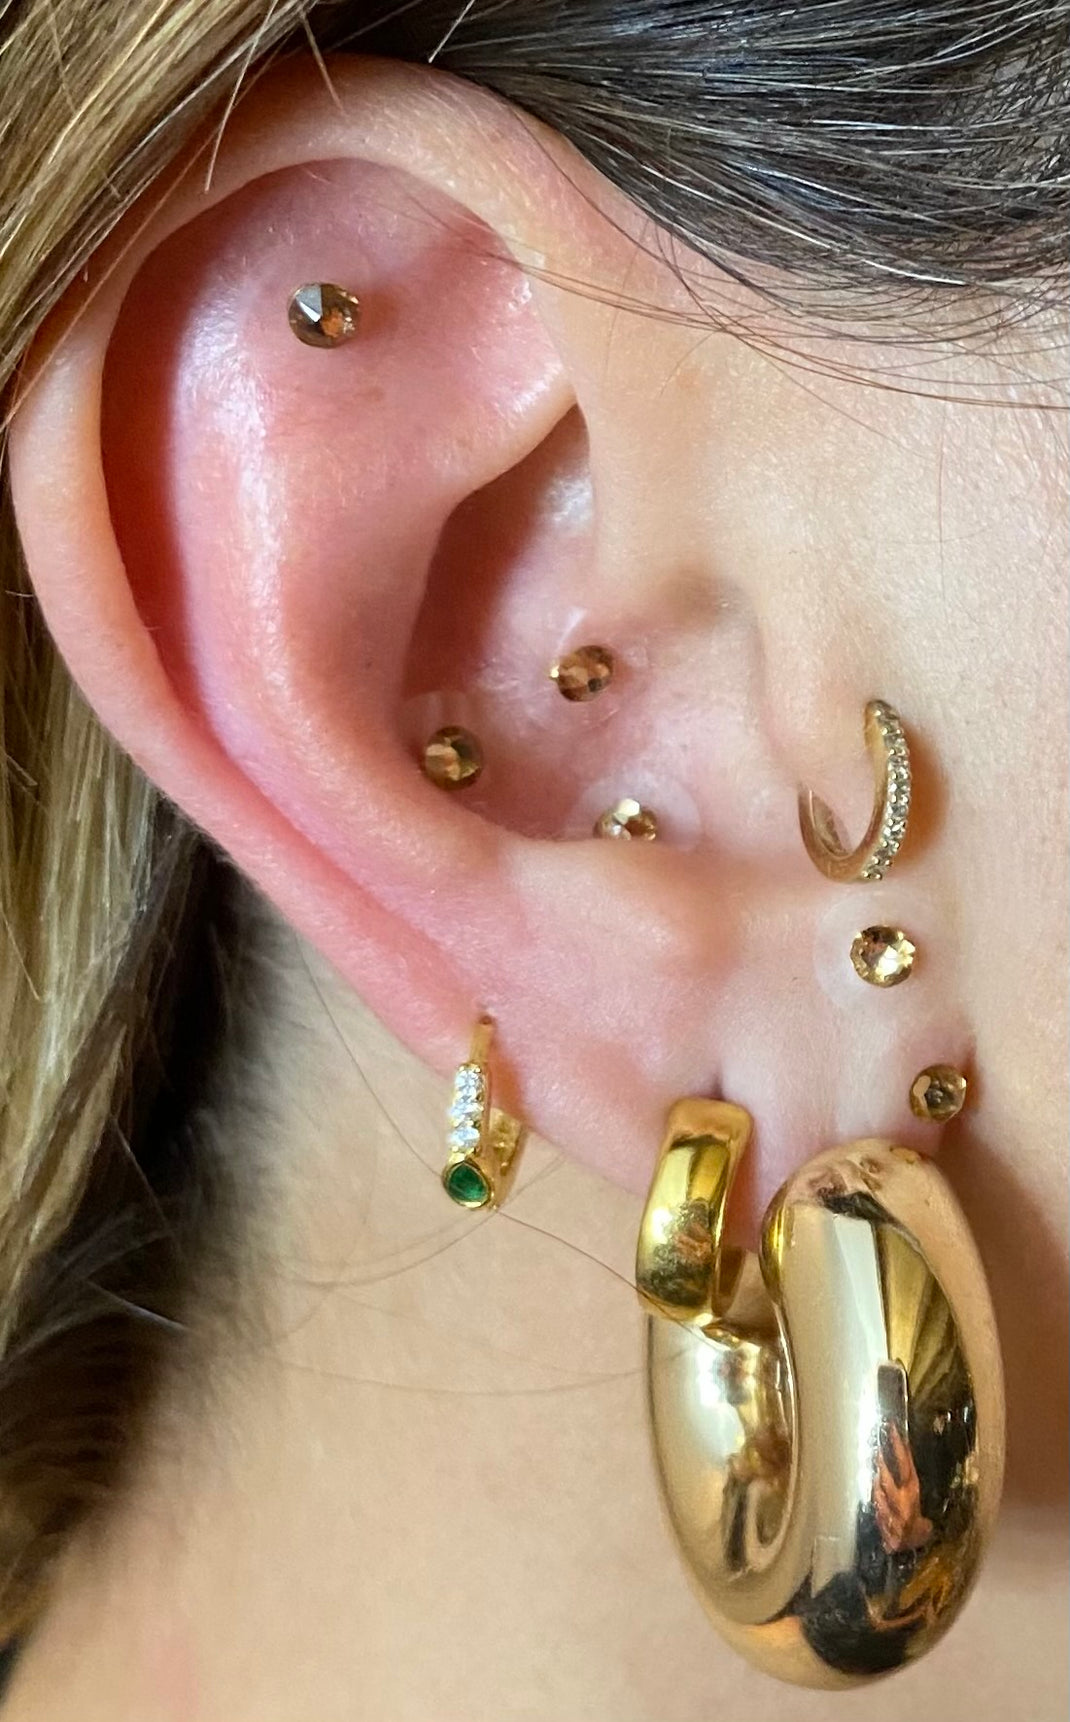 These ear seeds are made with 24k gold plated metal pellets with beautiful gold crystals on top. The light continuous pressure on the acupoints of the outer ear stimulates a response in the nervous system towards health. Each kit includes enough seeds for four treatments and detailed how-to instructions.